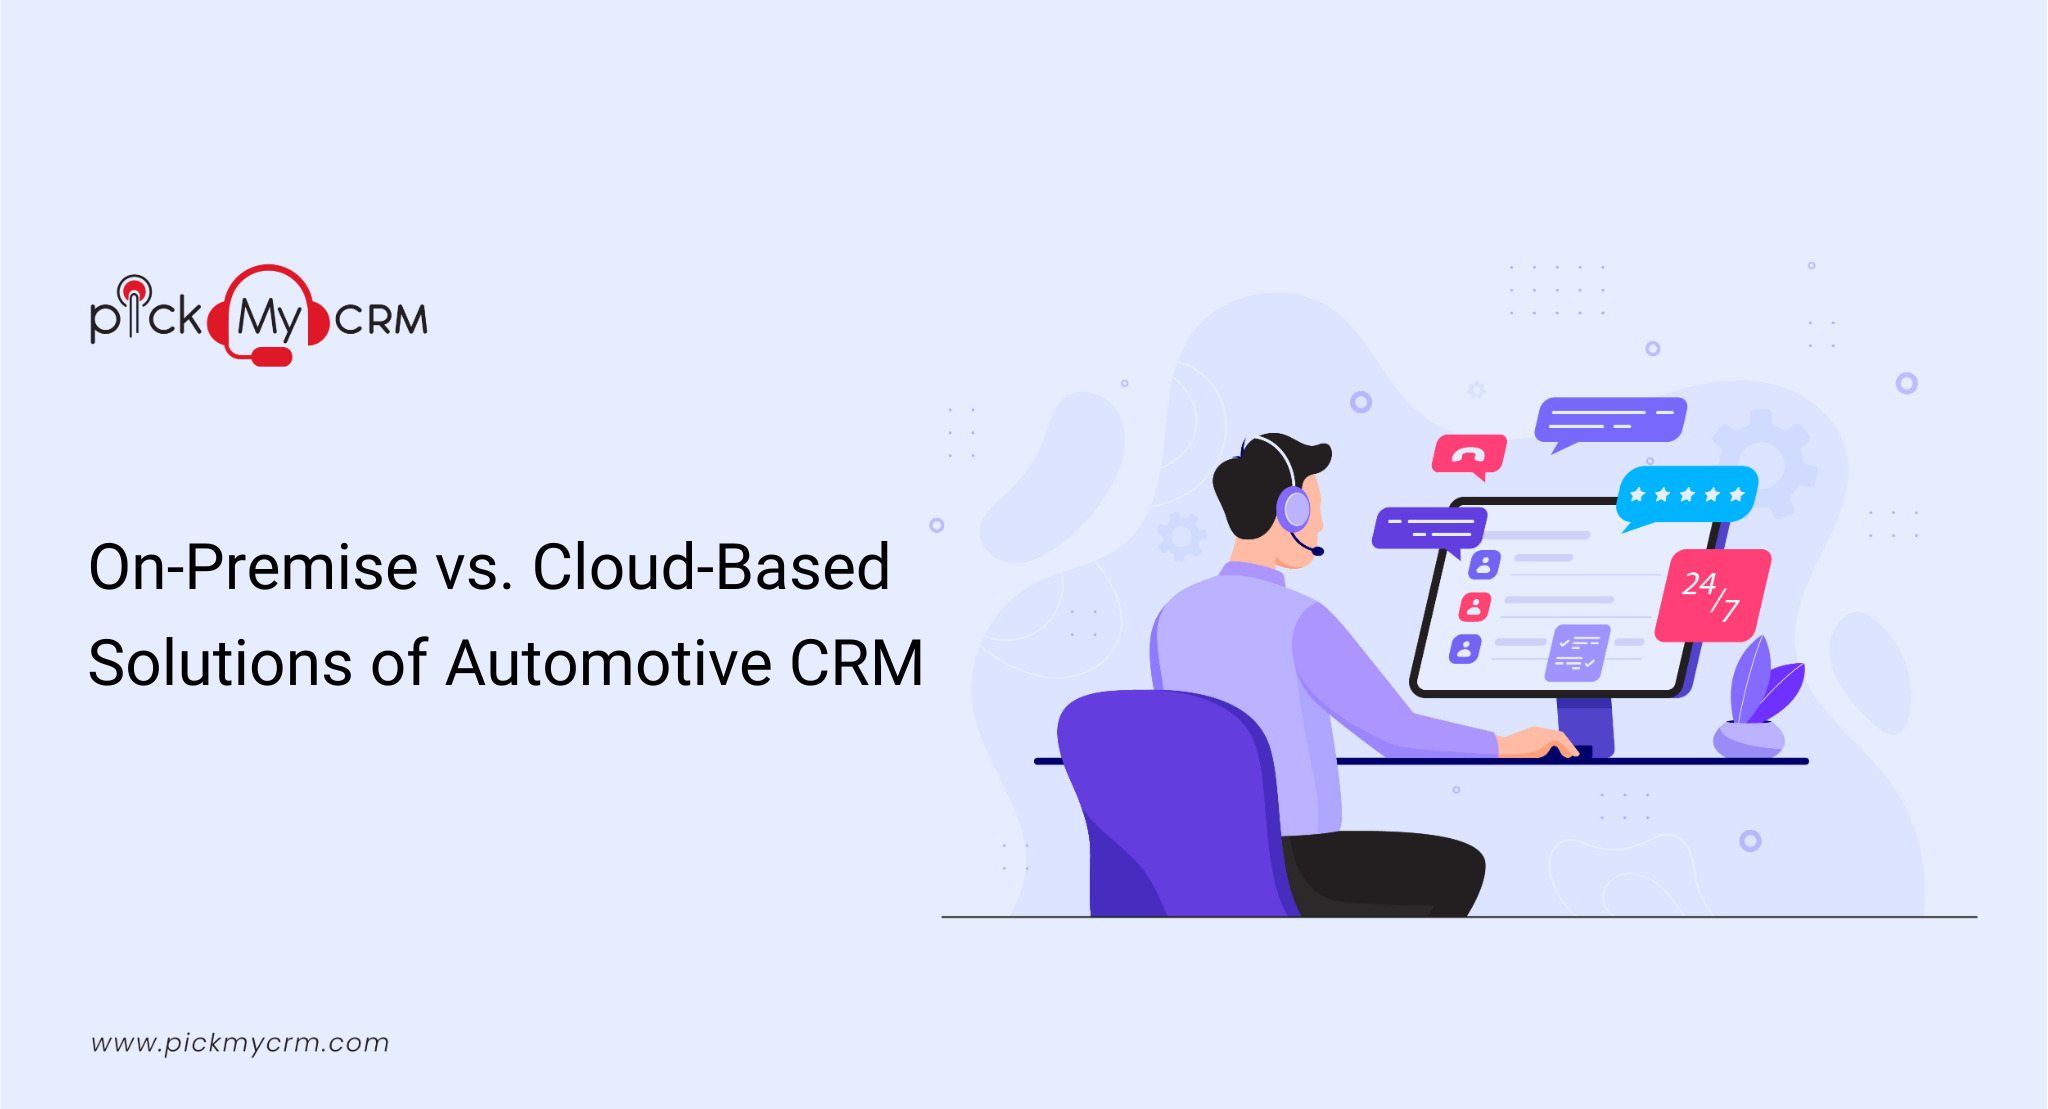 On-Premise vs. Cloud-Based Solutions of Automotive CRM